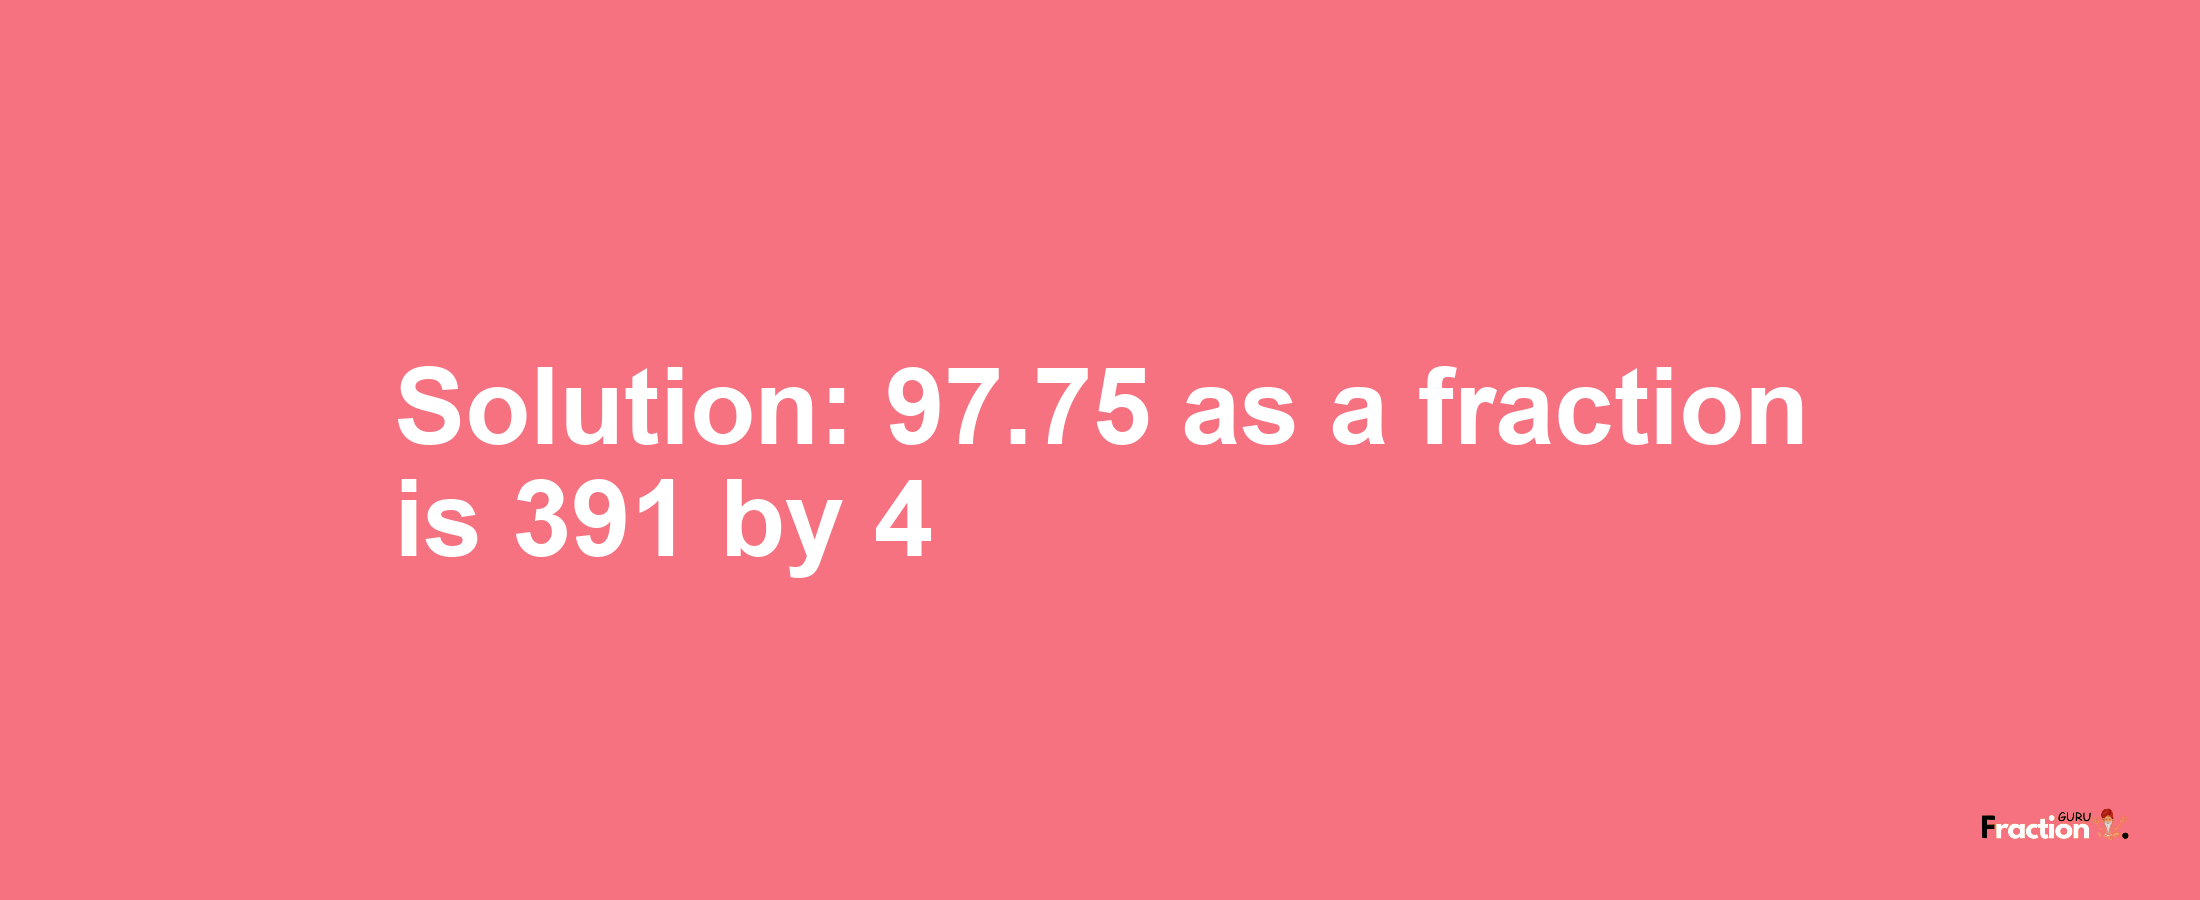 Solution:97.75 as a fraction is 391/4